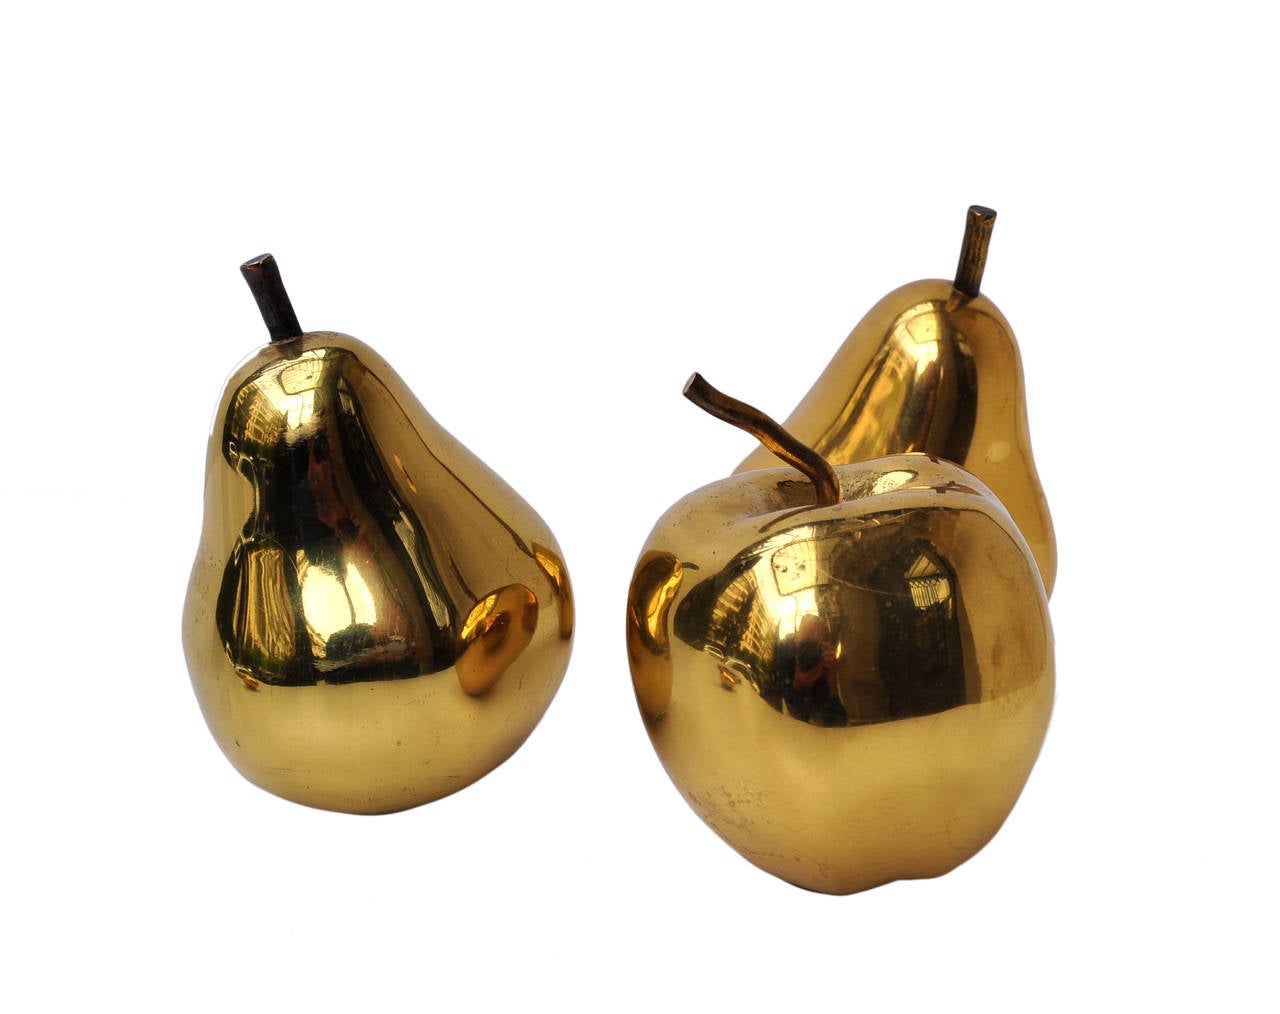 Three sublimely rendered bronze fruits alongside a mercurial stone minted in solid bronze. To the bottom of one fruit the substrate metal winks nickel plate beneath the gilt surface the core metal being bronze. The fruits are rendered to actual size